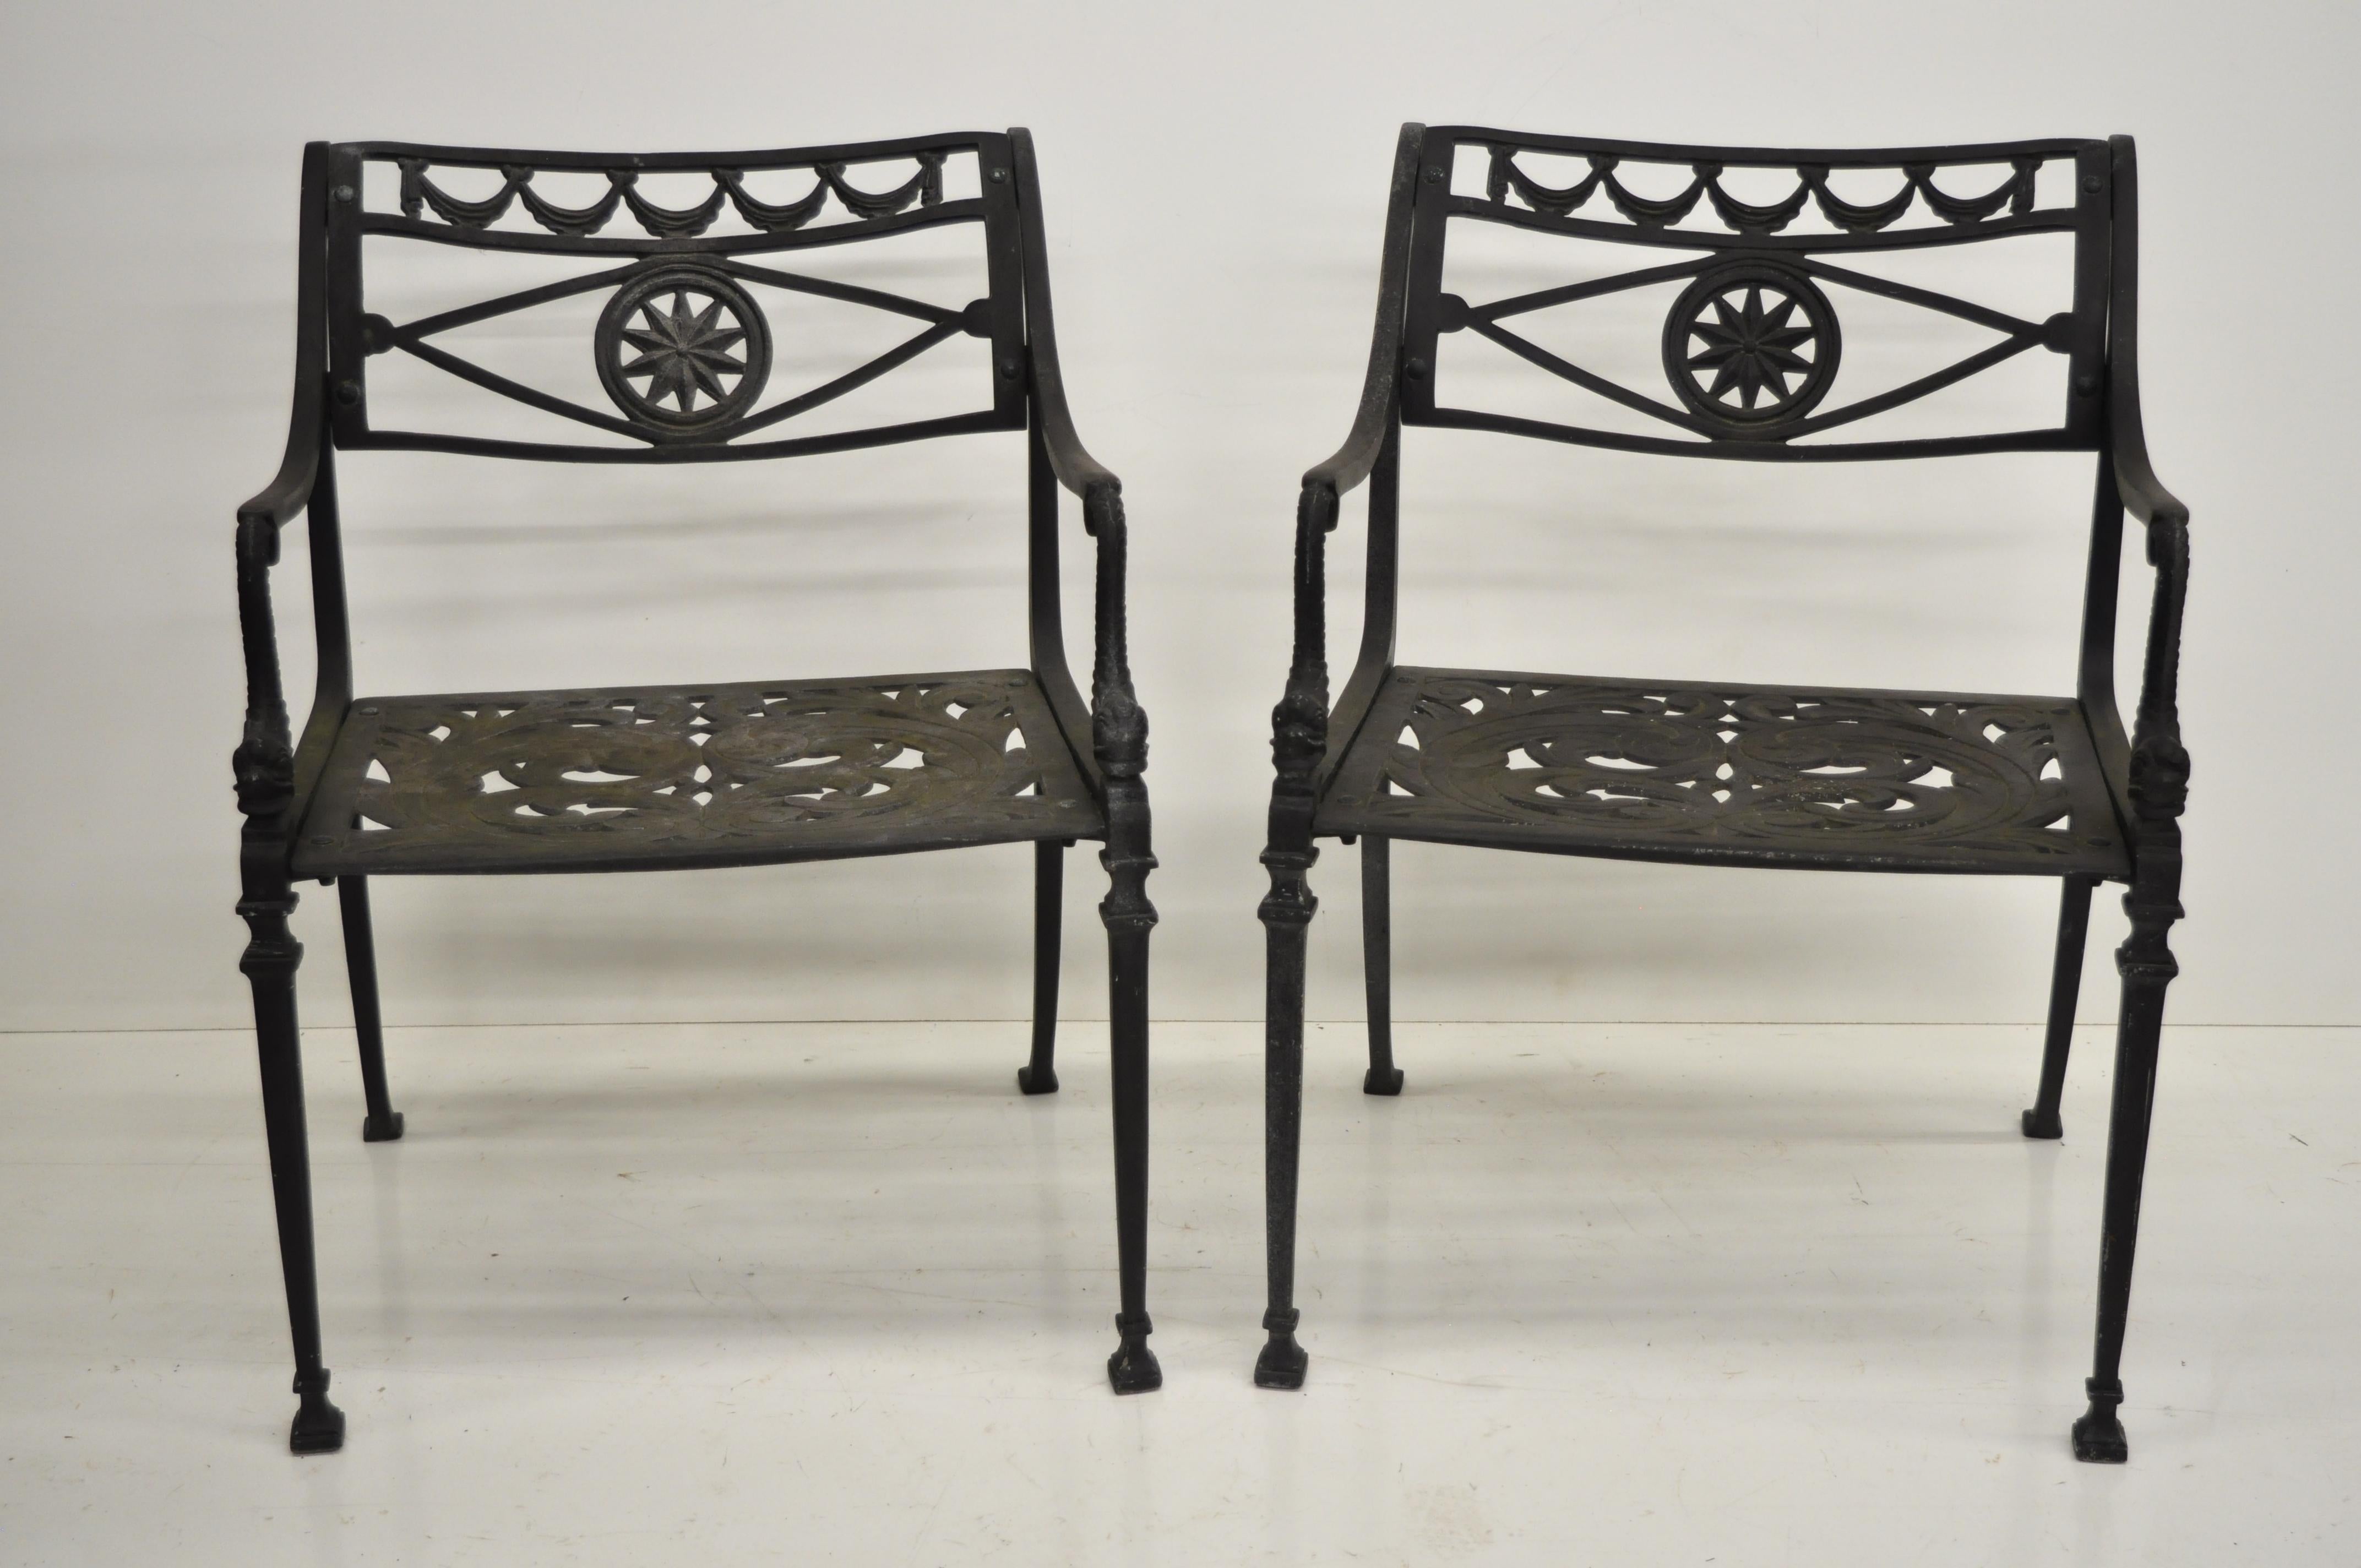 Pair of vintage neoclassical style dolphin armchairs in the neoclassical style. Unmarked but believed to be Molla. Item features pierced filigree design seat and star back, dolphin arm supports, heavy cast aluminium construction, quality